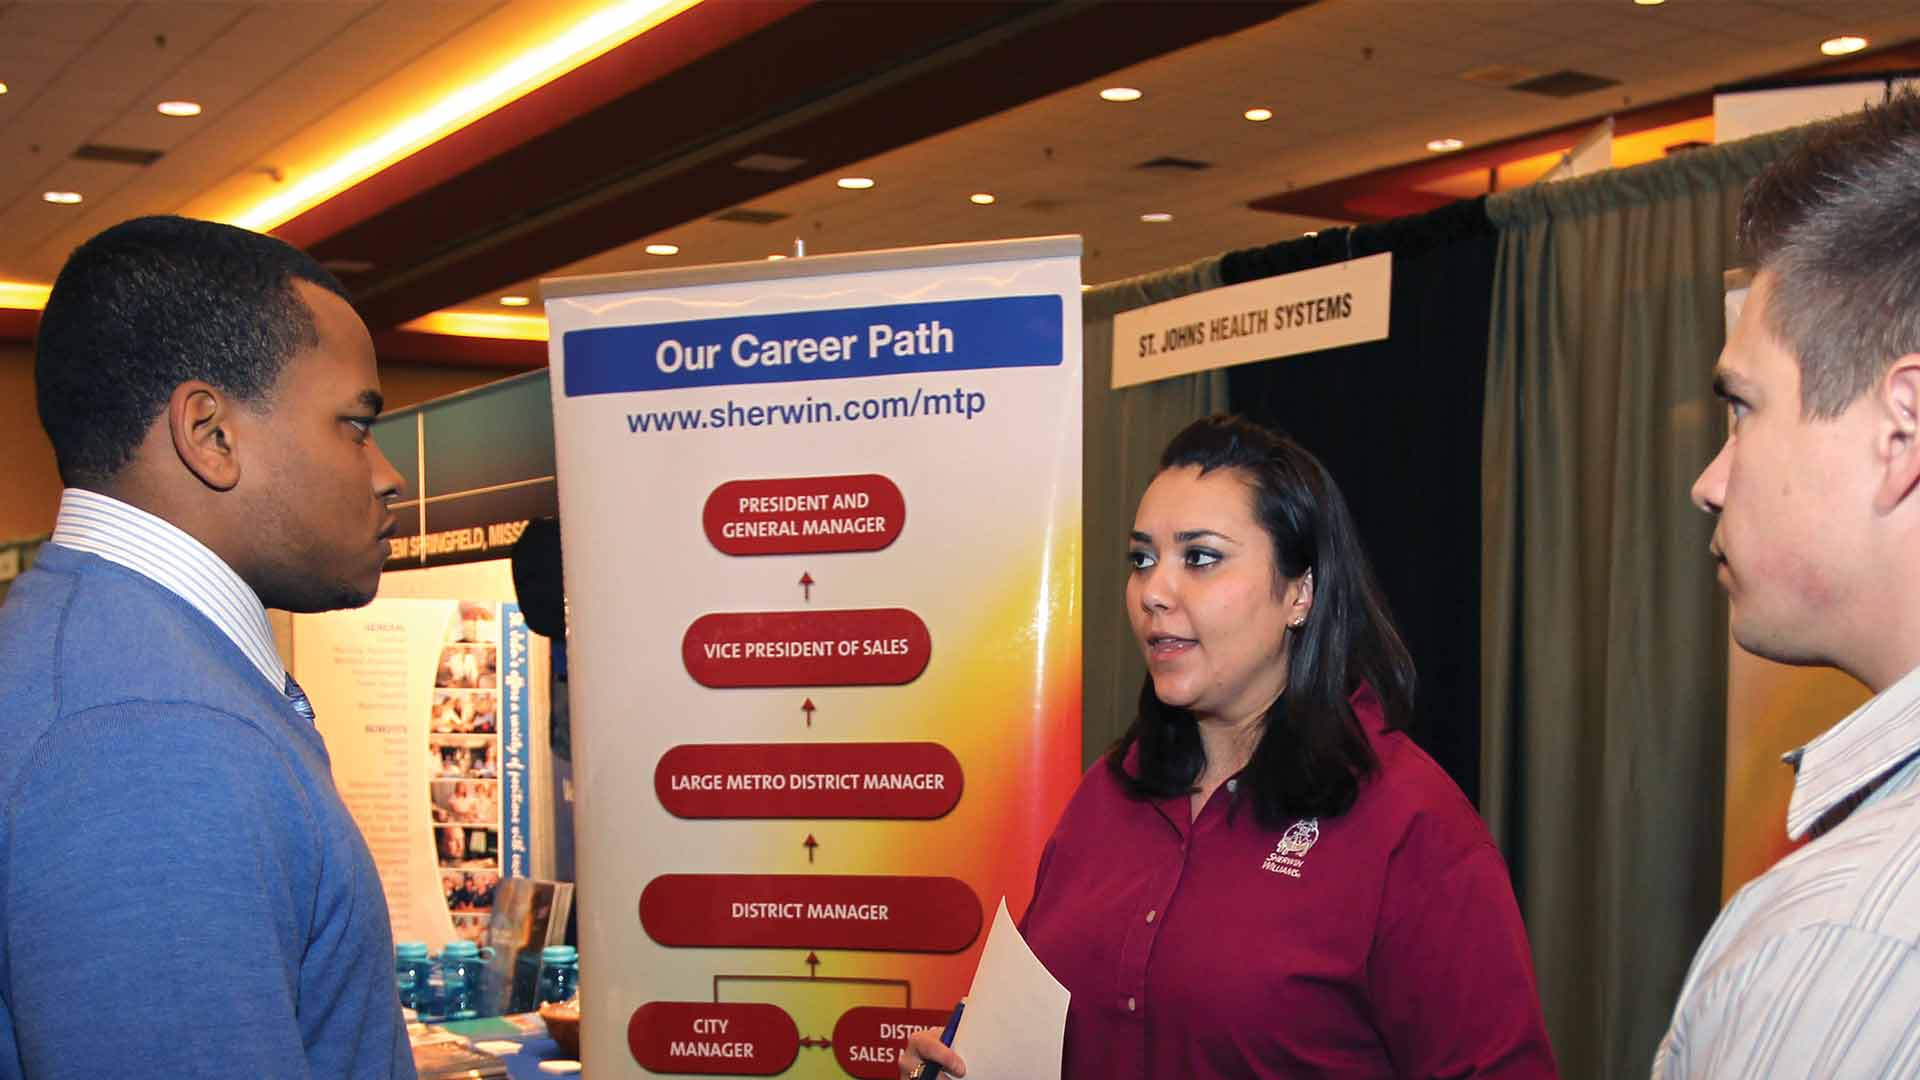 Three people are talking at a career fair.